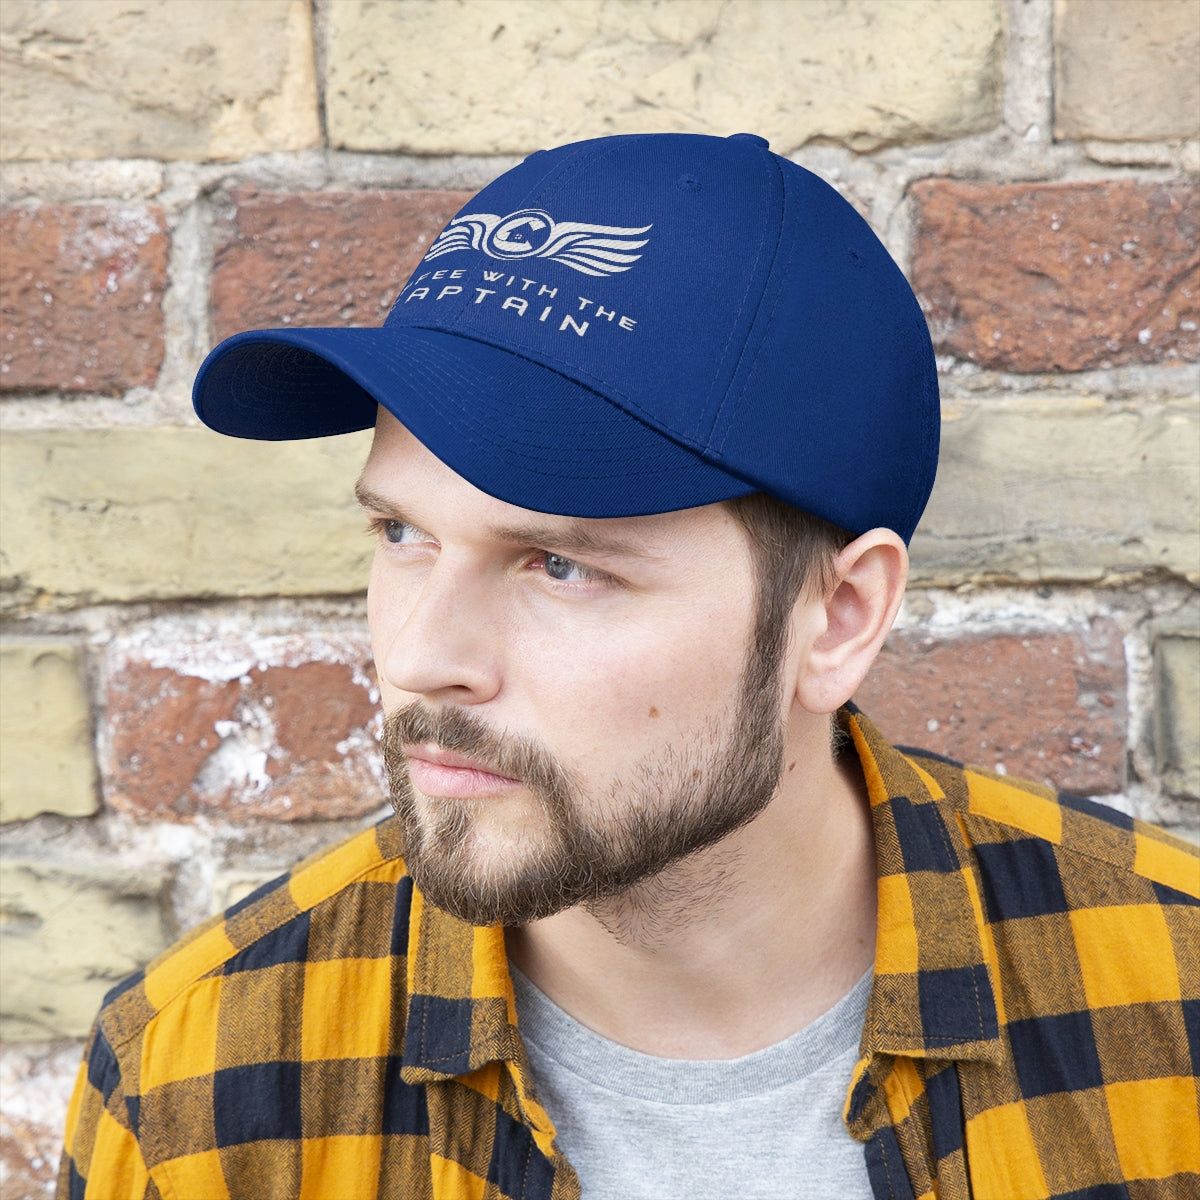 CWTC Twill Hat - Several Color Options!